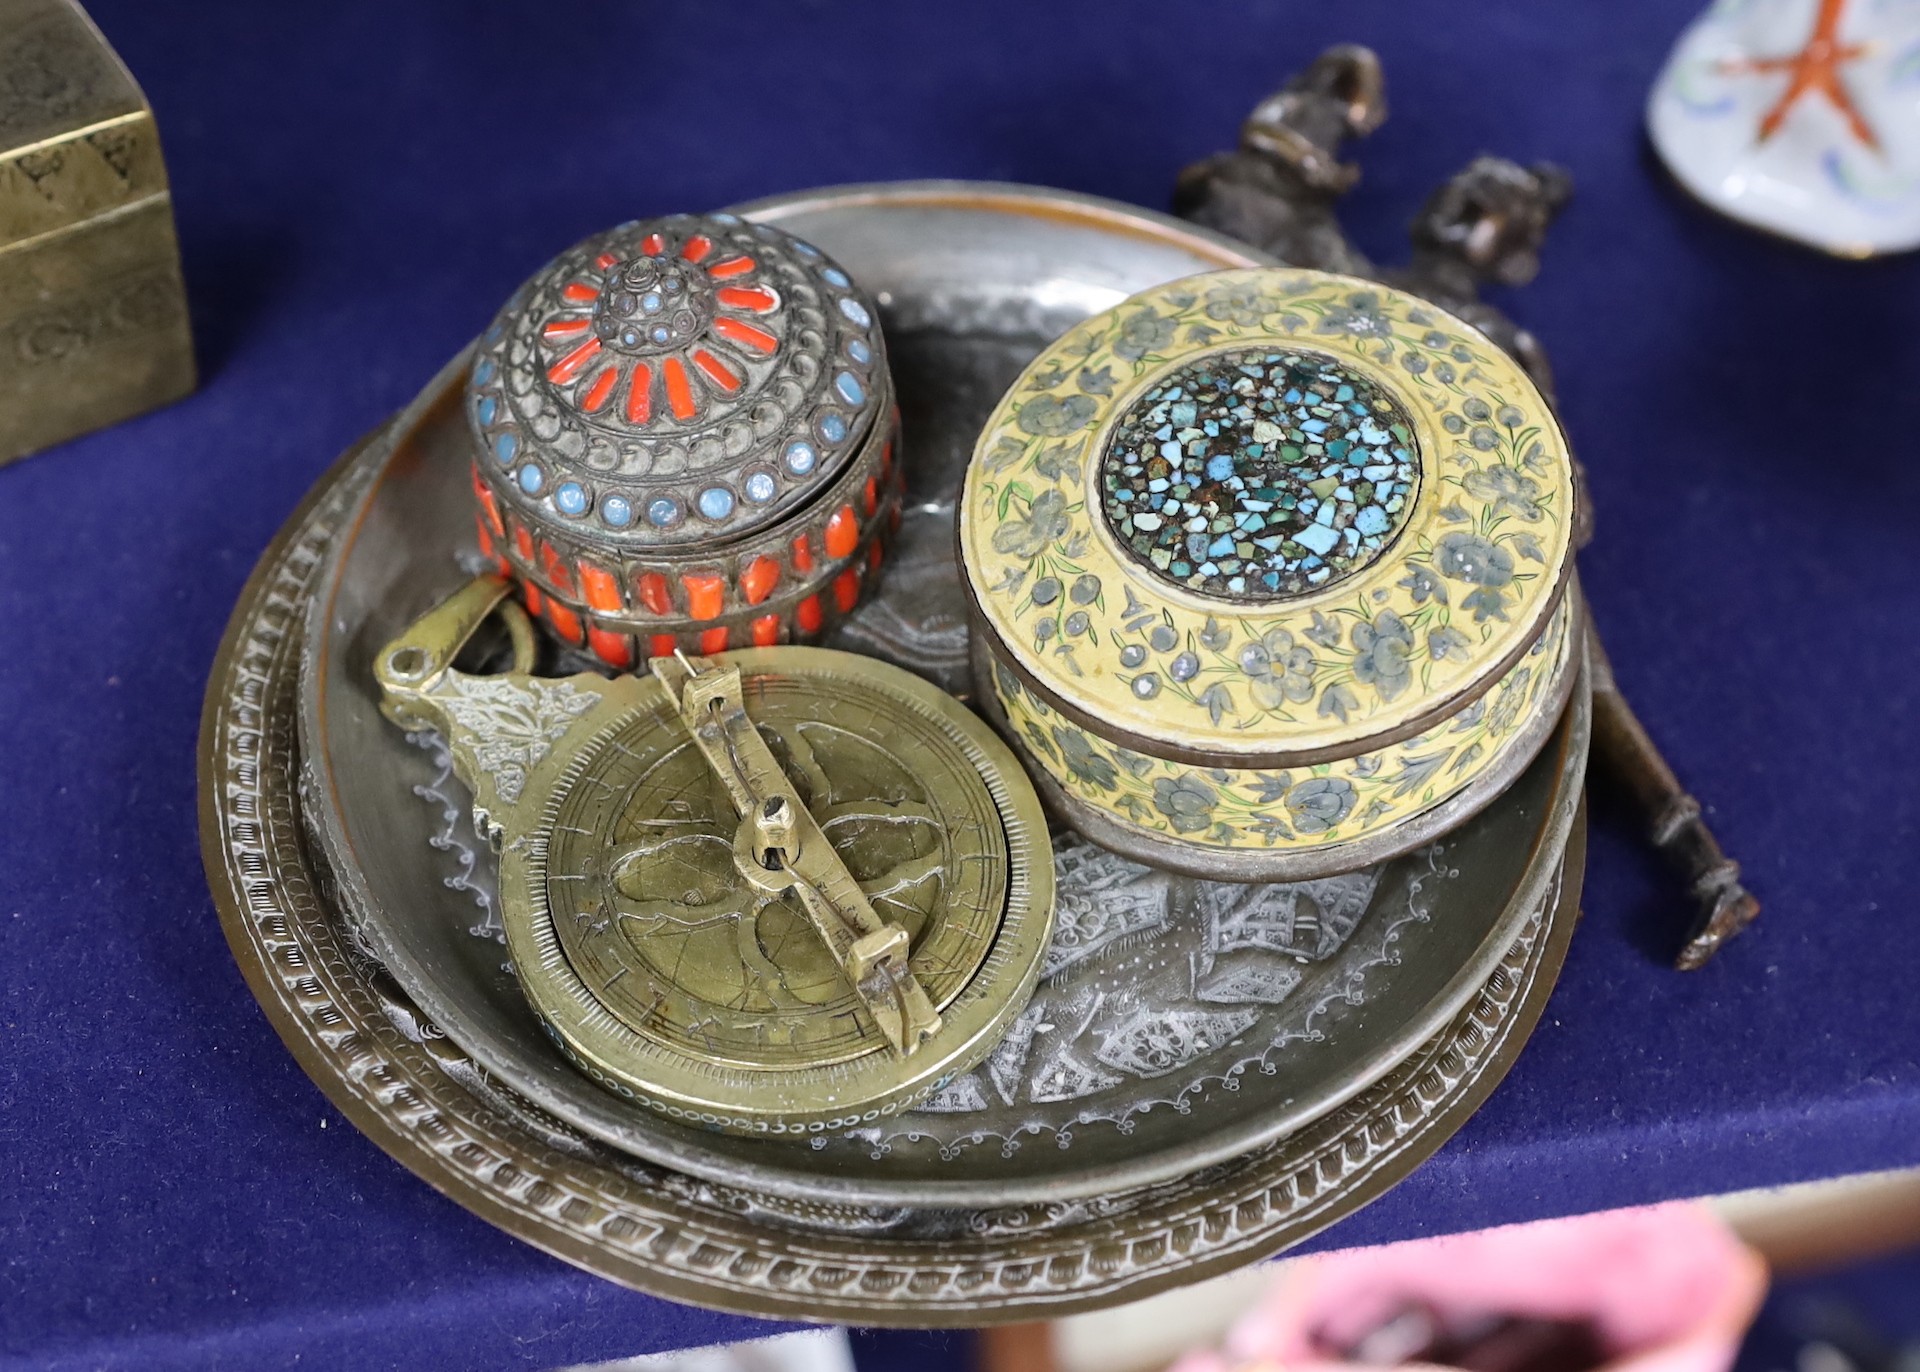 A group of Indian & Islamic items: an astrolobe, betel nut cutters, three bones and two dishes